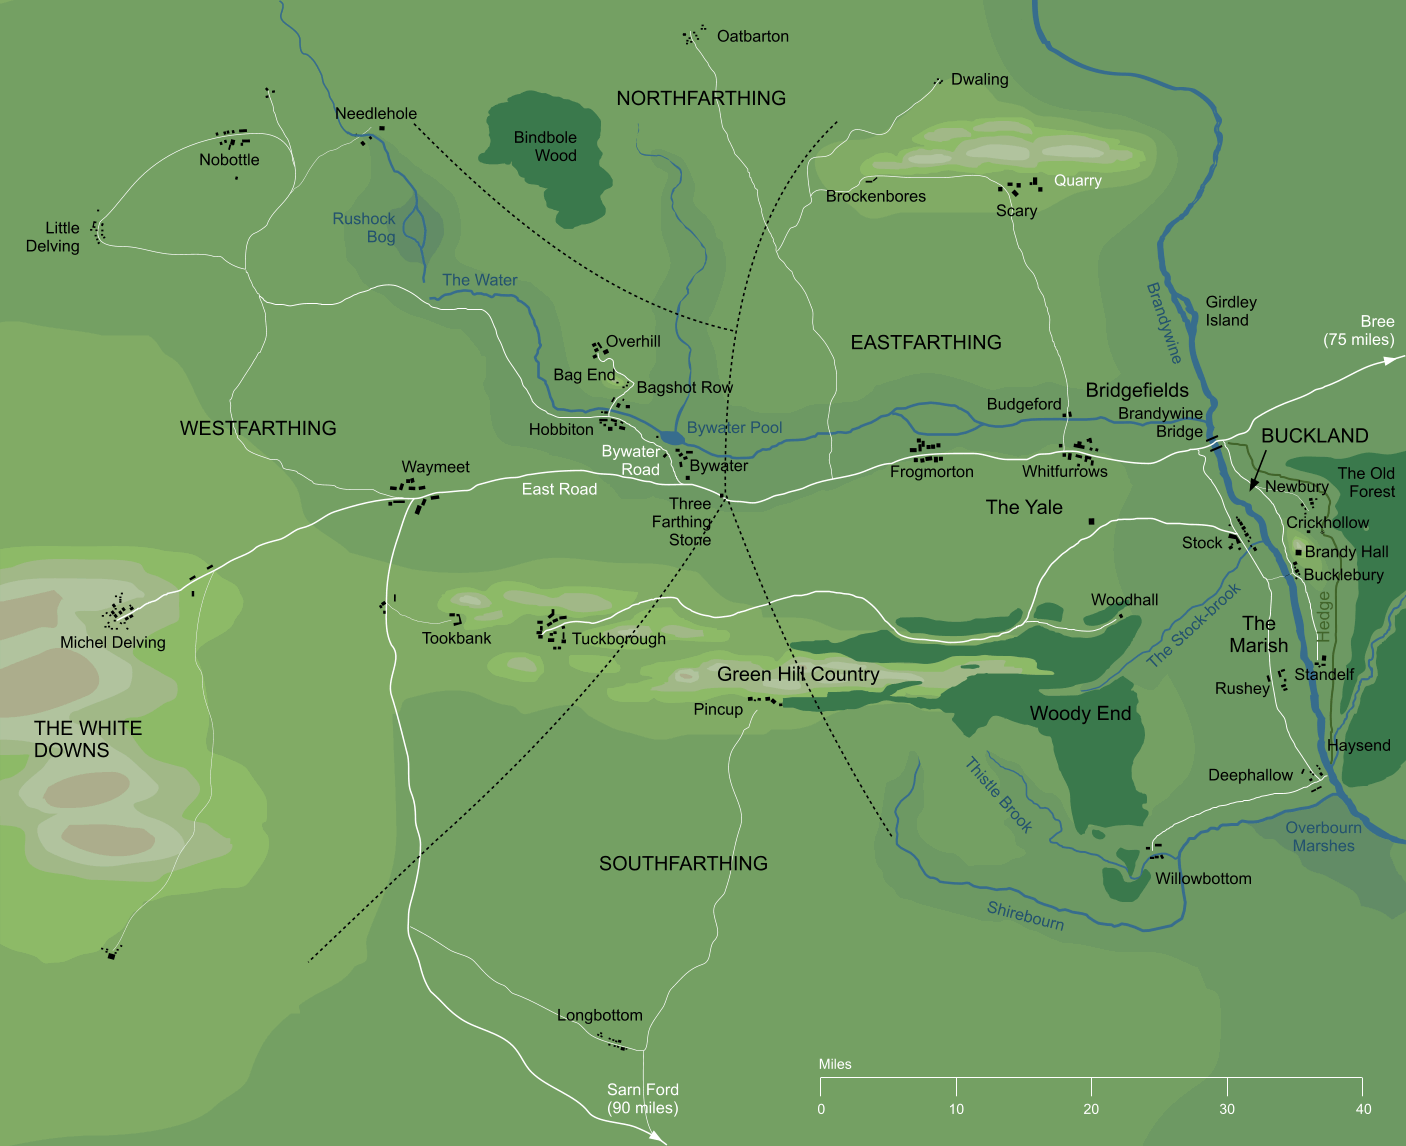 A partial map of the Shire